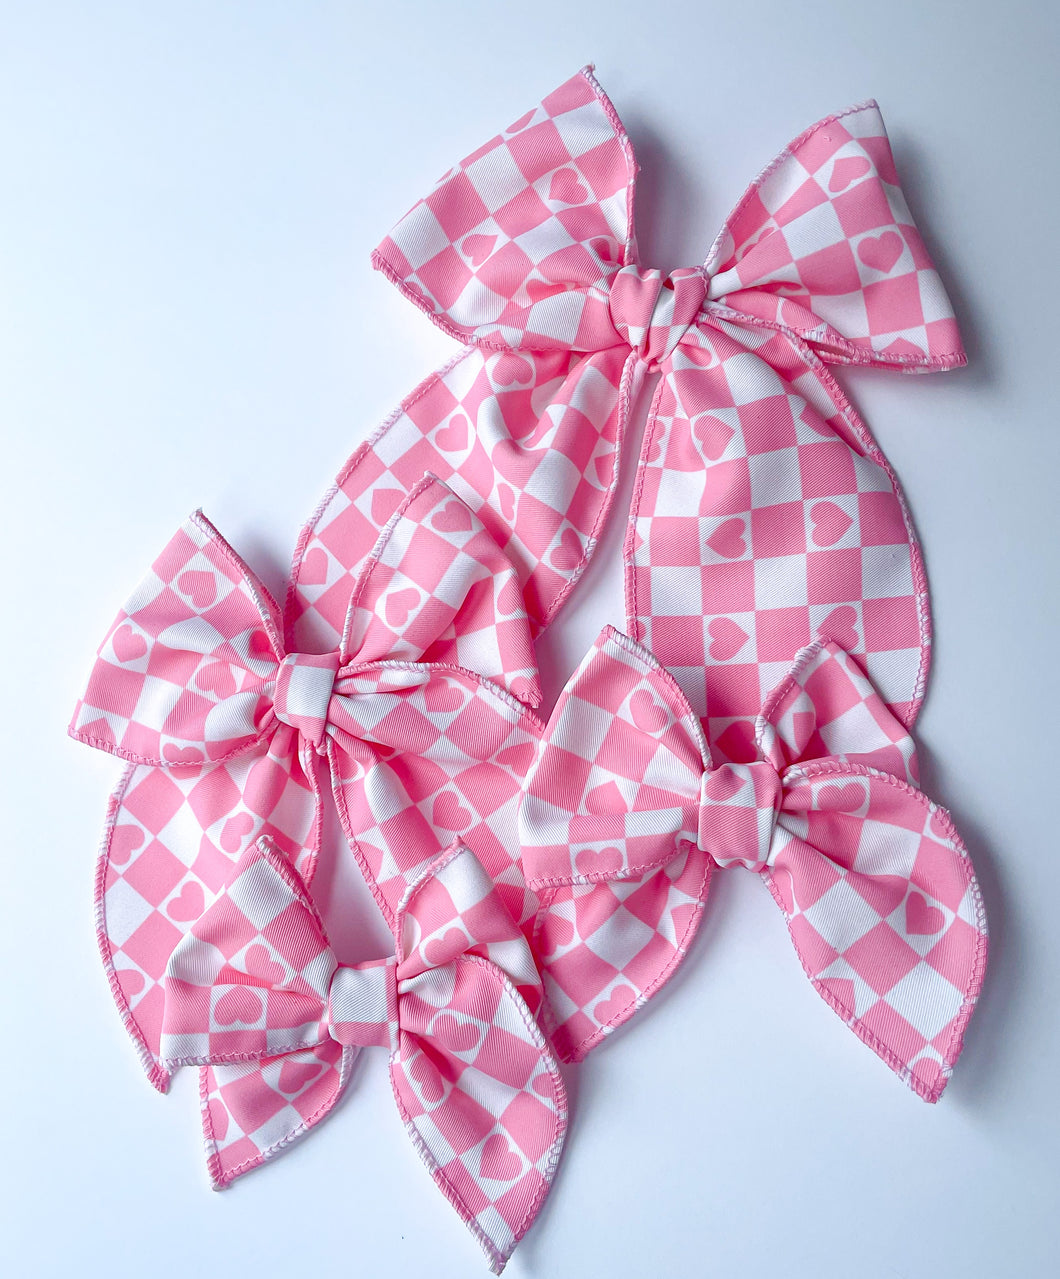 The Checkered Heart Bow